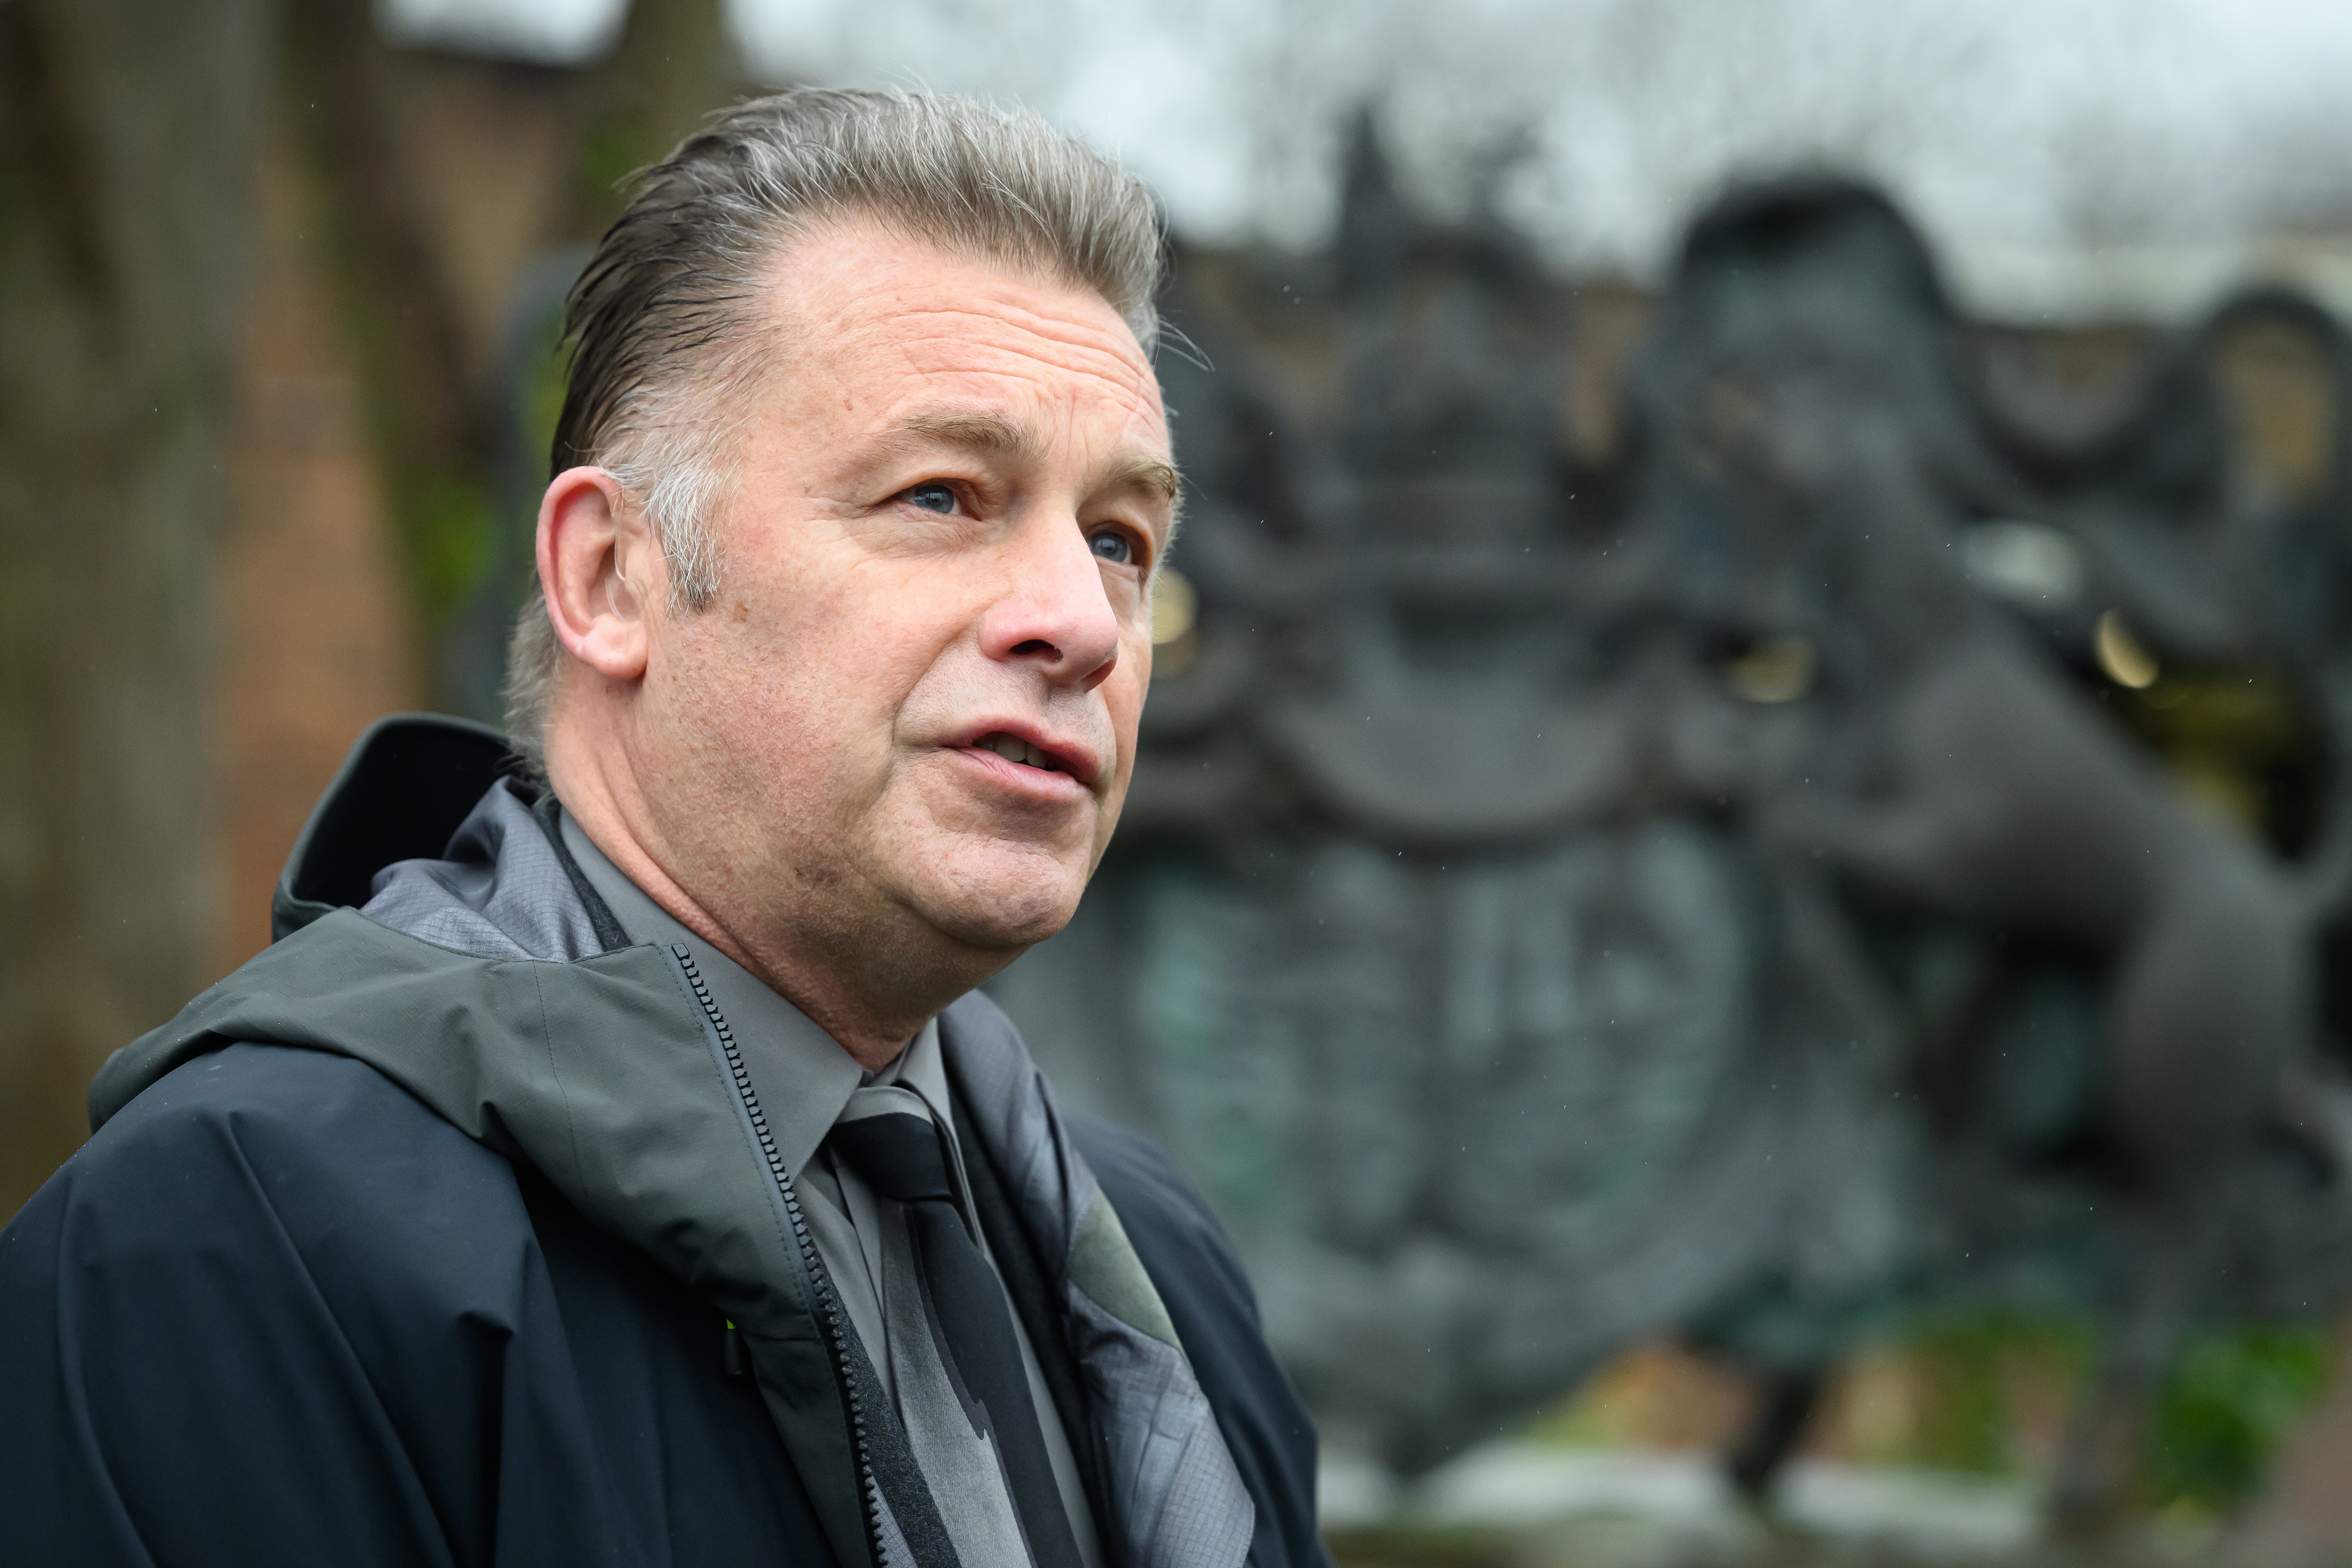 BBC presenter Chris Packham says ‘The science tells us we have to act’